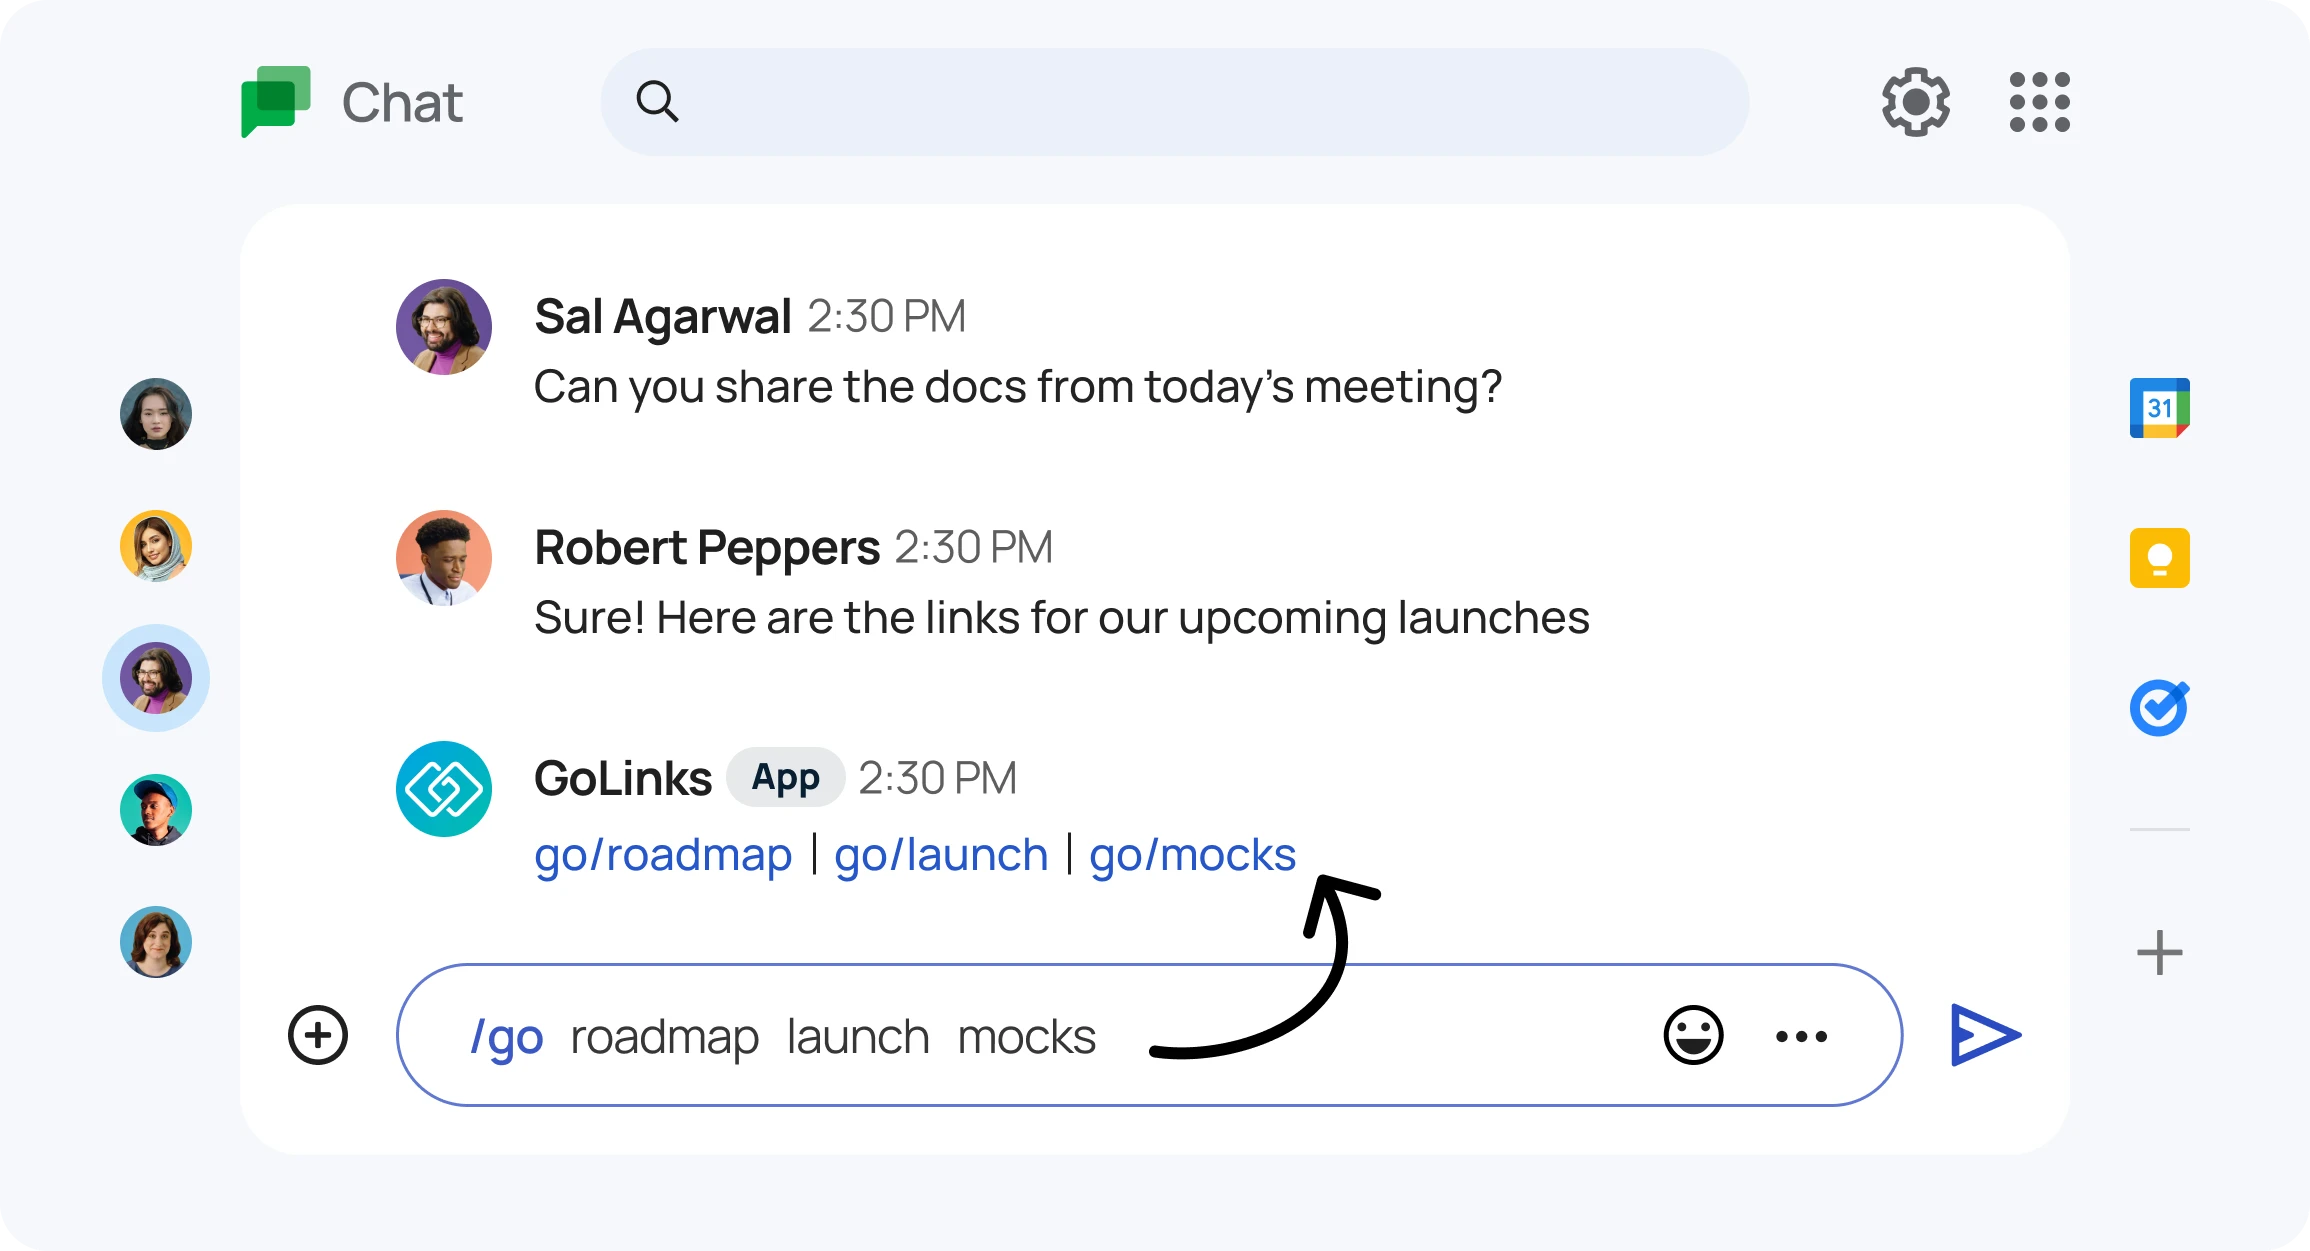 Converting go links in a Google Chat event